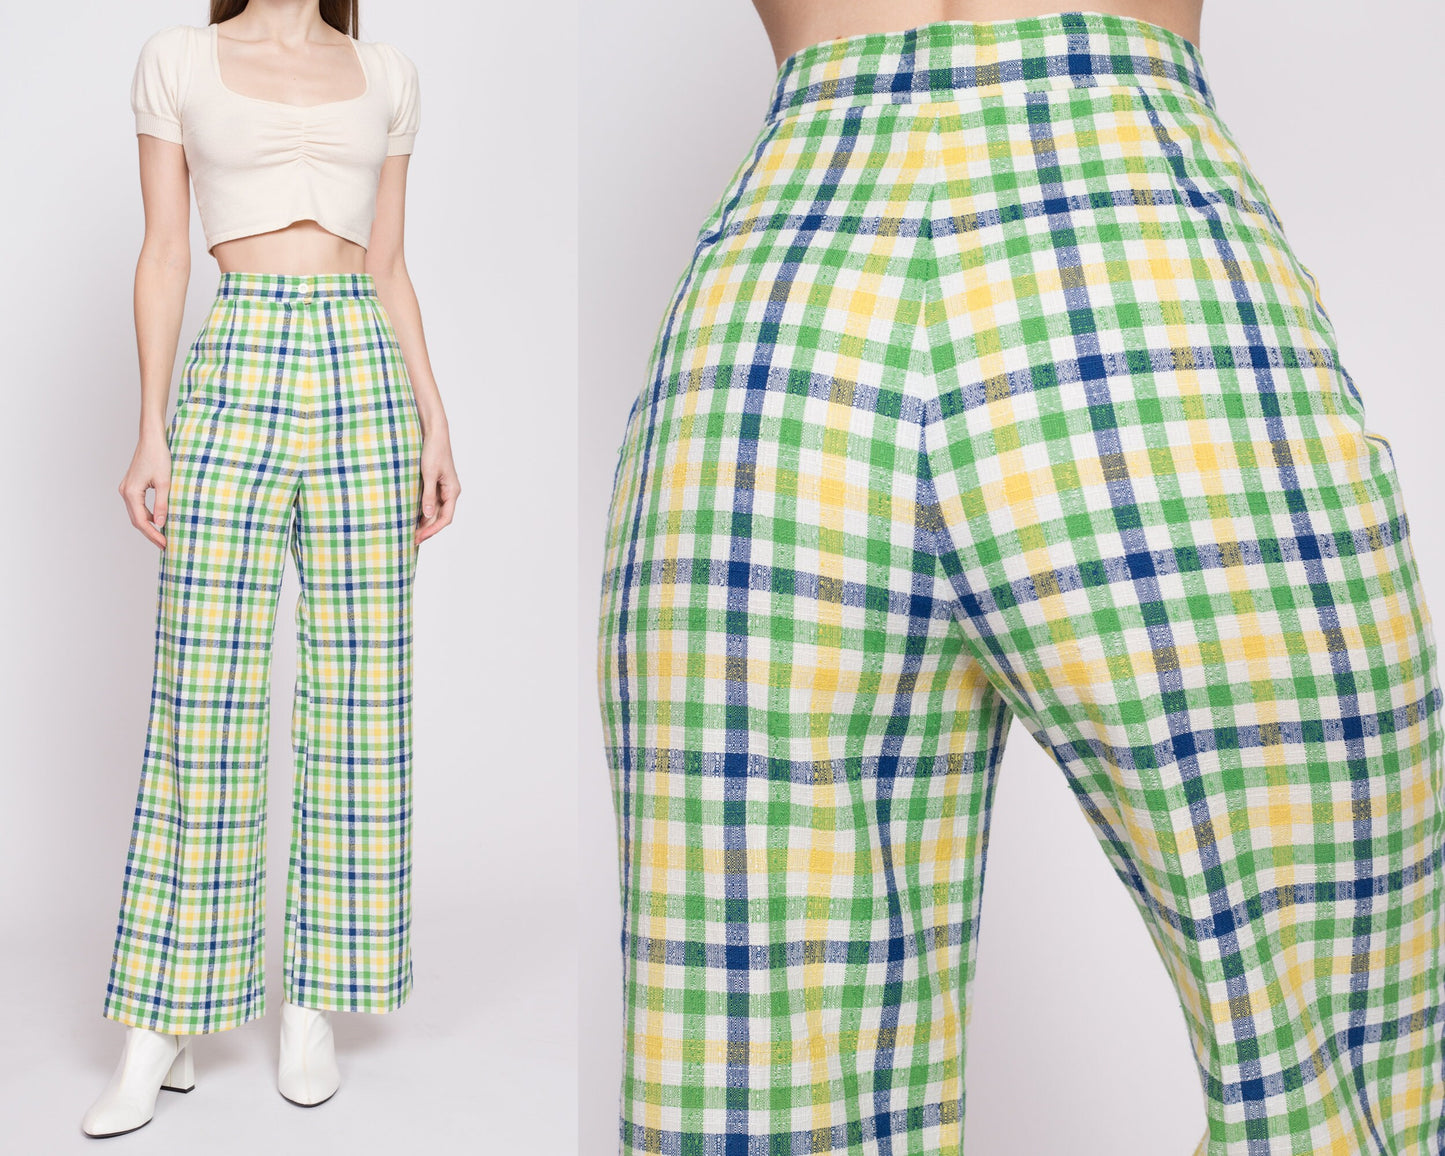 70s Green & Yellow Plaid High Waisted Pants - Small to Medium, 27" | Vintage Flared Leg Retro Trousers